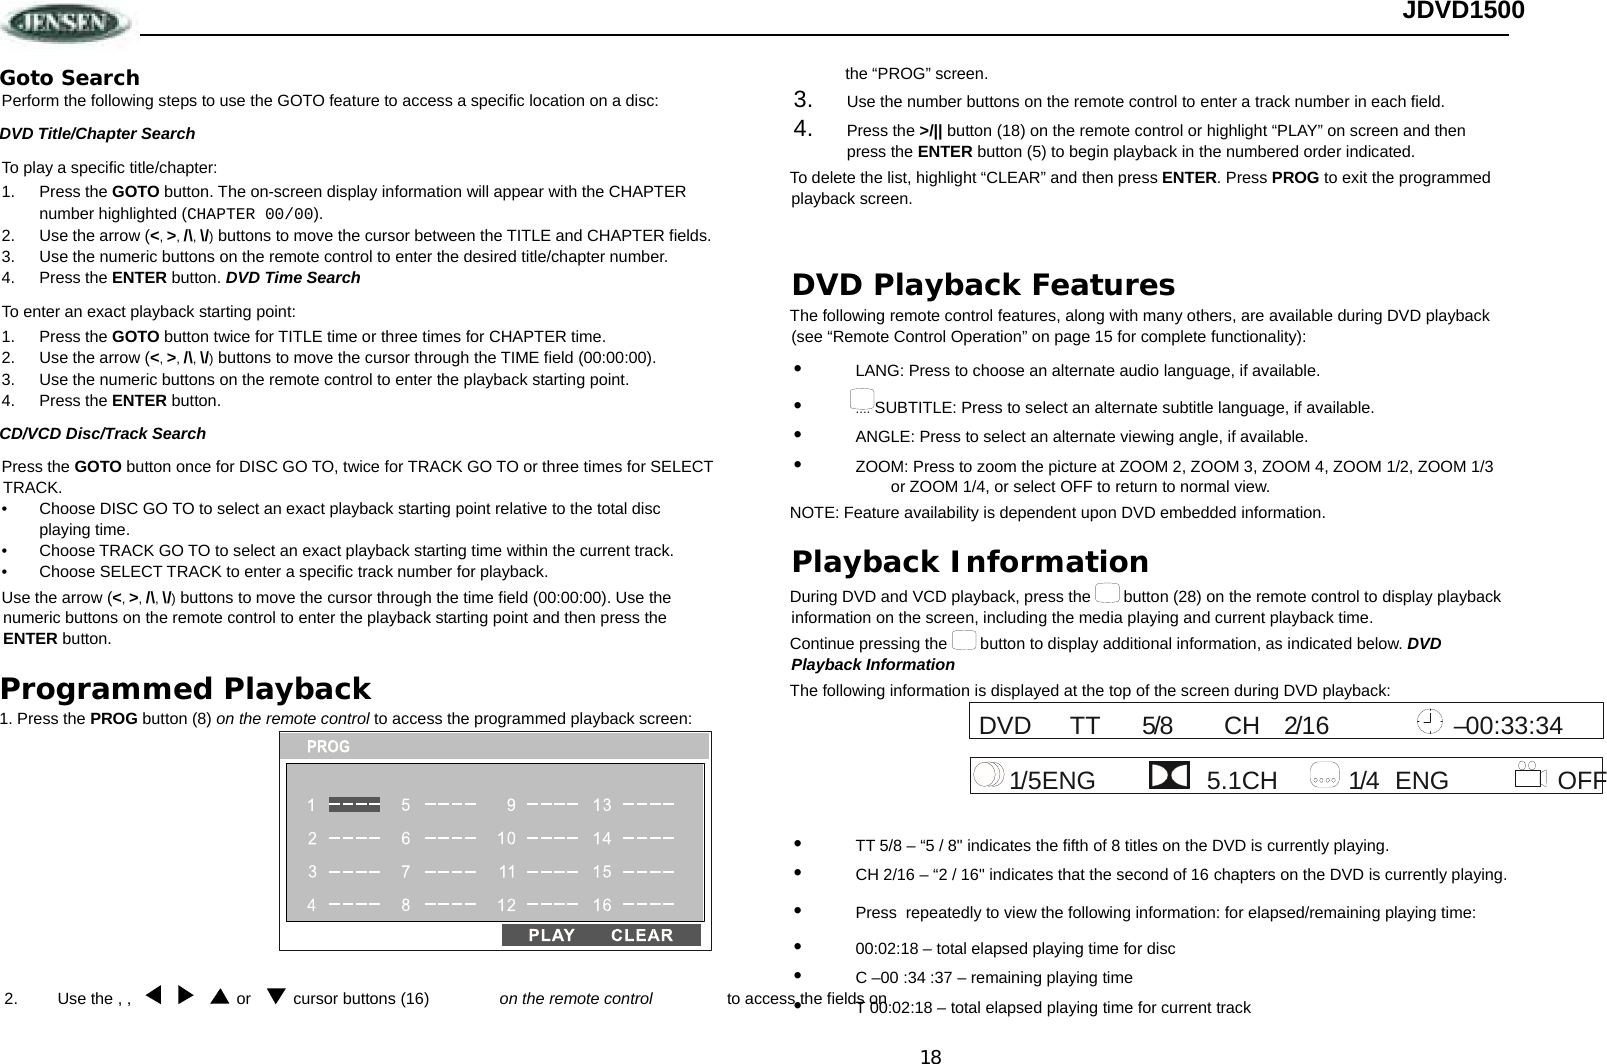 18 JDVD1500 Goto Search Perform the following steps to use the GOTO feature to access a specific location on a disc:  DVD Title/Chapter Search To play a specific title/chapter: 1. Press the GOTO button. The on-screen display information will appear with the CHAPTER number highlighted (CHAPTER 00/00). 2.  Use the arrow (&lt;, &gt;, /\, \/) buttons to move the cursor between the TITLE and CHAPTER fields.  3.  Use the numeric buttons on the remote control to enter the desired title/chapter number. 4. Press the ENTER button. DVD Time Search To enter an exact playback starting point: 1. Press the GOTO button twice for TITLE time or three times for CHAPTER time.  2.  Use the arrow (&lt;, &gt;, /\, \/) buttons to move the cursor through the TIME field (00:00:00).  3.  Use the numeric buttons on the remote control to enter the playback starting point. 4. Press the ENTER button. CD/VCD Disc/Track Search Press the GOTO button once for DISC GO TO, twice for TRACK GO TO or three times for SELECT TRACK.  •  Choose DISC GO TO to select an exact playback starting point relative to the total disc playing time. •  Choose TRACK GO TO to select an exact playback starting time within the current track. •  Choose SELECT TRACK to enter a specific track number for playback. Use the arrow (&lt;, &gt;, /\, \/) buttons to move the cursor through the time field (00:00:00). Use the numeric buttons on the remote control to enter the playback starting point and then press the ENTER button. Programmed Playback 1. Press the PROG button (8) on the remote control to access the programmed playback screen:  the “PROG” screen.  3.  Use the number buttons on the remote control to enter a track number in each field.  4.  Press the &gt;/|| button (18) on the remote control or highlight “PLAY” on screen and then press the ENTER button (5) to begin playback in the numbered order indicated. To delete the list, highlight “CLEAR” and then press ENTER. Press PROG to exit the programmed playback screen.  DVD Playback Features The following remote control features, along with many others, are available during DVD playback (see “Remote Control Operation” on page 15 for complete functionality): •  LANG: Press to choose an alternate audio language, if available. •  .... SUBTITLE: Press to select an alternate subtitle language, if available. •  ANGLE: Press to select an alternate viewing angle, if available. •  ZOOM: Press to zoom the picture at ZOOM 2, ZOOM 3, ZOOM 4, ZOOM 1/2, ZOOM 1/3 or ZOOM 1/4, or select OFF to return to normal view. NOTE: Feature availability is dependent upon DVD embedded information. Playback Information During DVD and VCD playback, press the   button (28) on the remote control to display playback information on the screen, including the media playing and current playback time.  Continue pressing the   button to display additional information, as indicated below. DVD Playback Information The following information is displayed at the top of the screen during DVD playback:  •  TT 5/8 – “5 / 8&quot; indicates the fifth of 8 titles on the DVD is currently playing. •  CH 2/16 – “2 / 16&quot; indicates that the second of 16 chapters on the DVD is currently playing. •  Press  repeatedly to view the following information: for elapsed/remaining playing time: •  00:02:18 – total elapsed playing time for disc •  C –00 :34 :37 – remaining playing time •  T 00:02:18 – total elapsed playing time for current track 5TTDVD 00:33:34 16/2CH/8– 4ENG OFF CH1/5ENG 5.1 1/ cursor buttons (16)  Use the , ,  2.  or   on the remote control  to access the fields on  